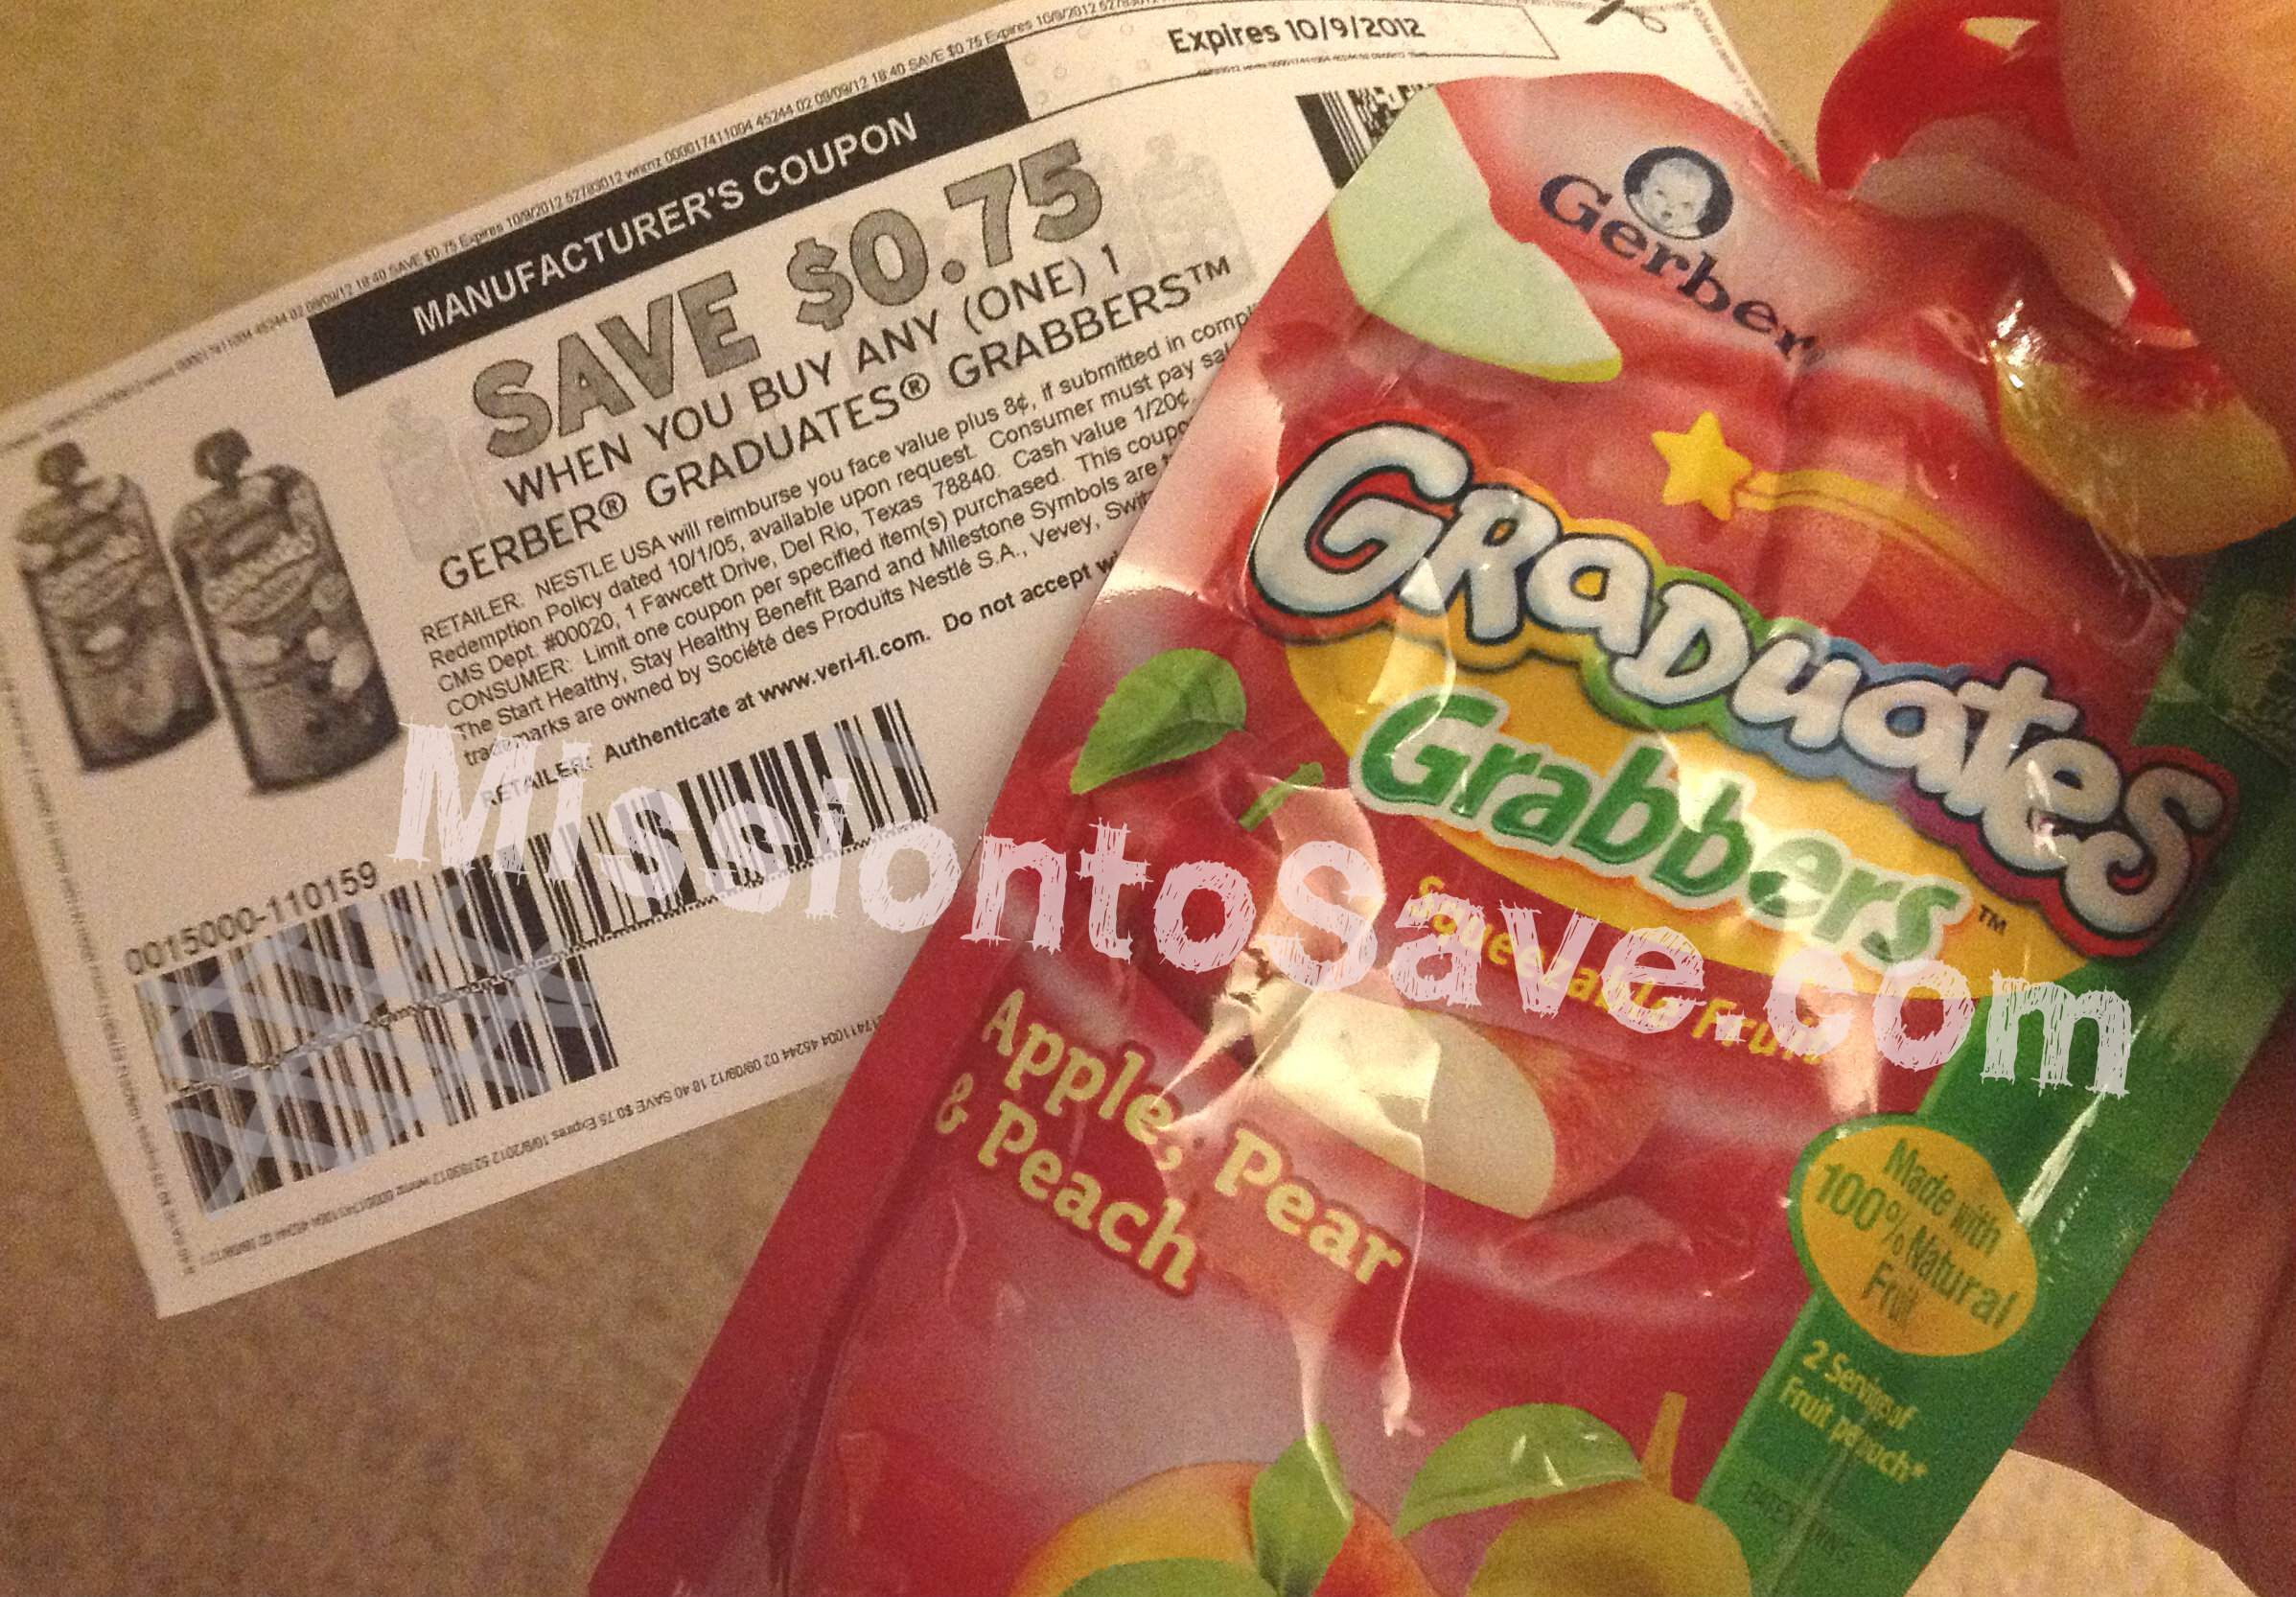 New Gerber Pouches Printable Coupons= Freebies At Giant Eagle - Free Printable Giant Eagle Coupons